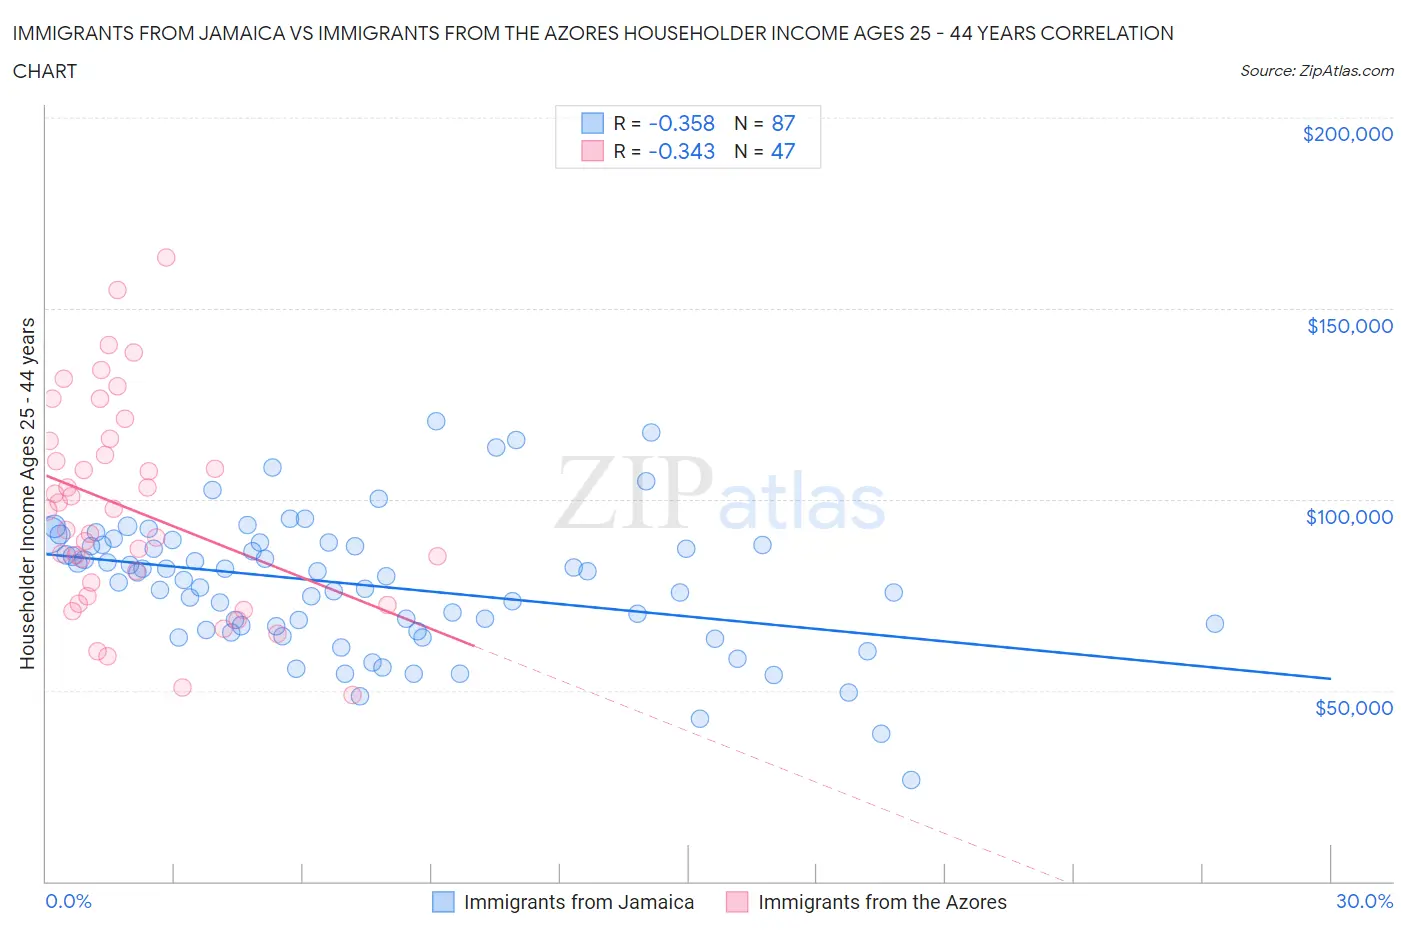 Immigrants from Jamaica vs Immigrants from the Azores Householder Income Ages 25 - 44 years